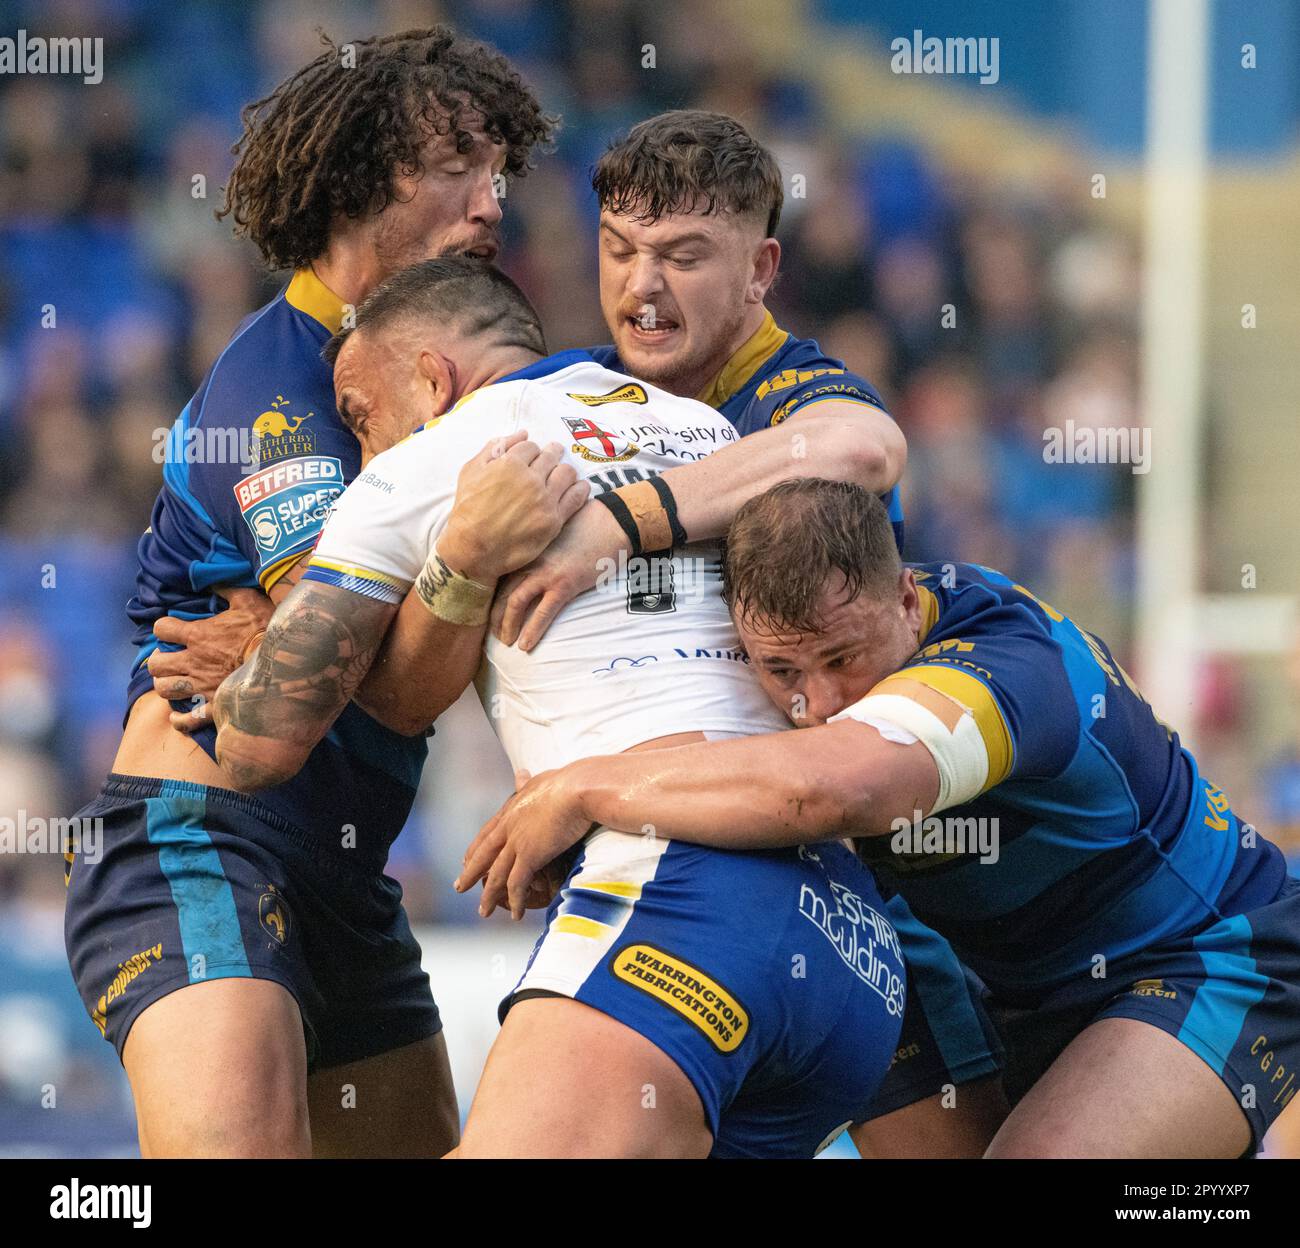 Warrington, Cheshire, England 5th May 2023. Warrington’s Paul Vaughan tackled by Wakefield players, during Warrington Wolves Rugby League Football Club V Wakefield Trinity Rugby League Football Club at the Halliwell Jones Stadium, the Betfred Super League. (Credit Image: ©Cody Froggatt/Alamy live news) Stock Photo